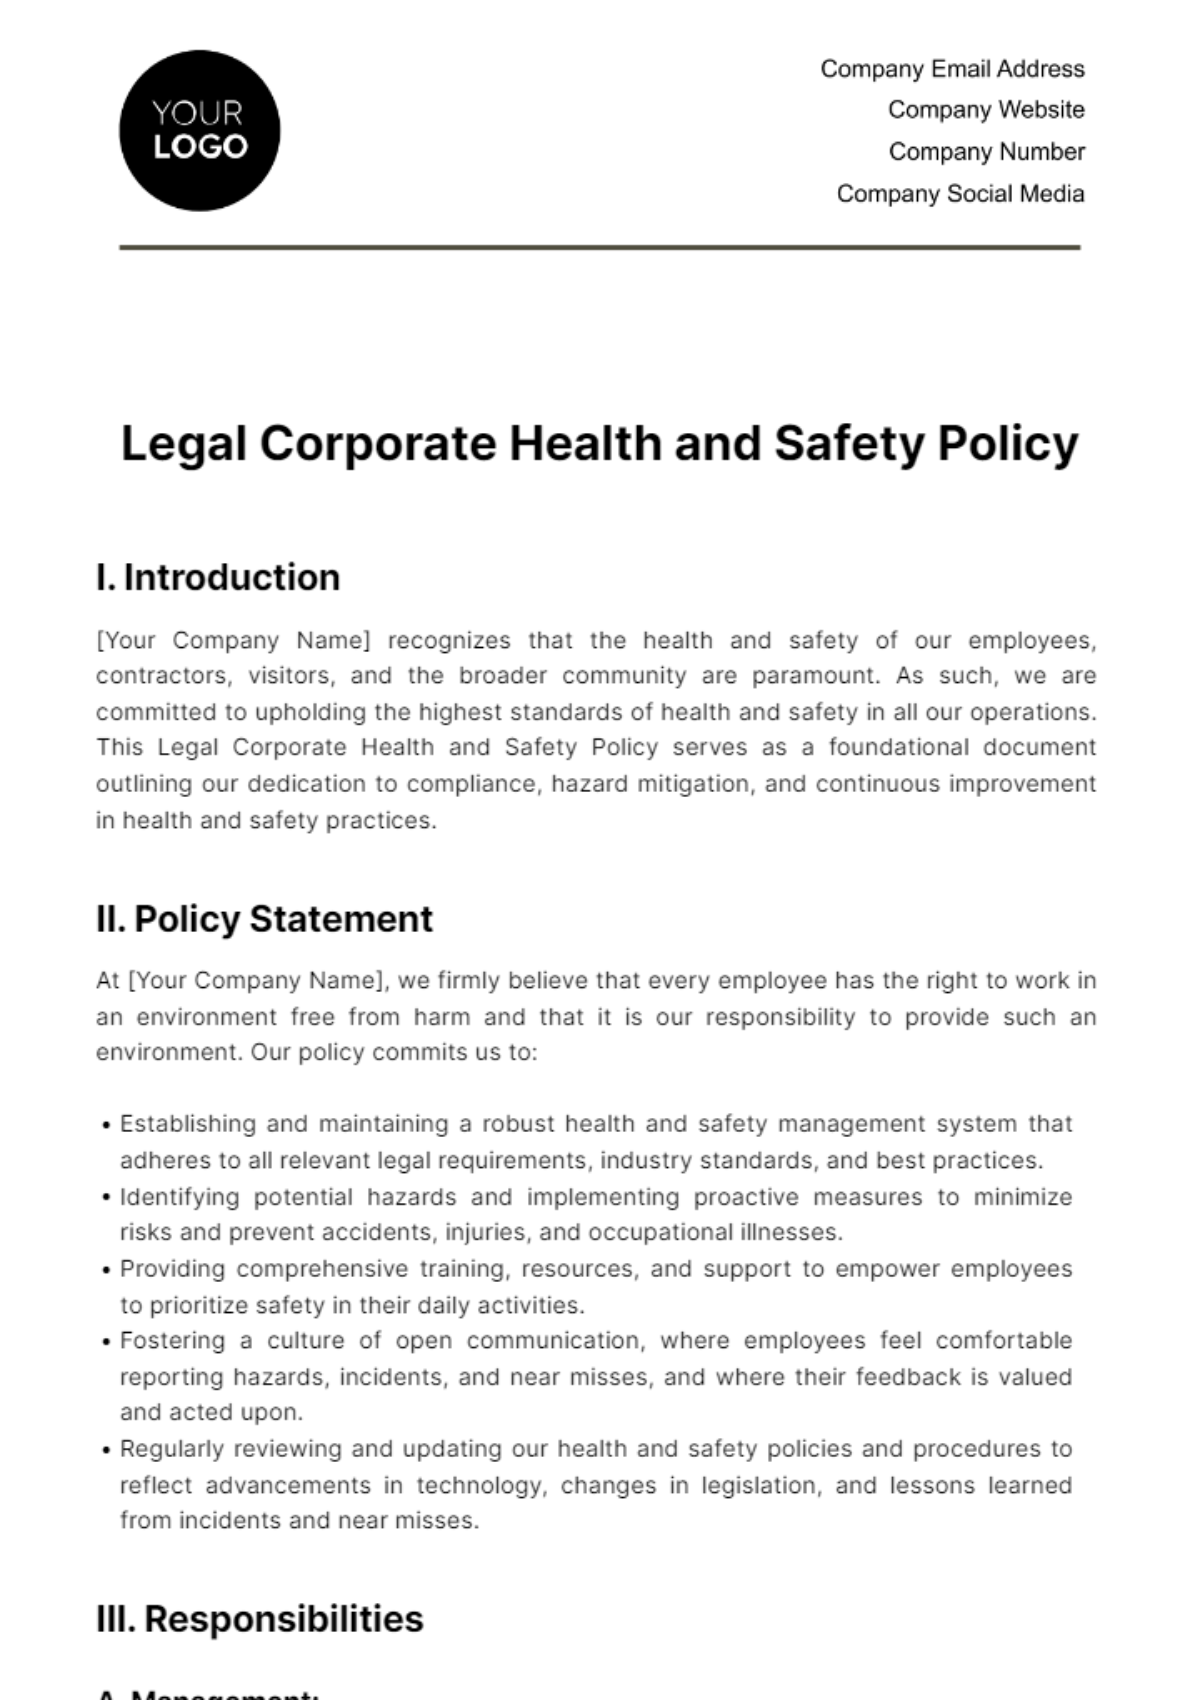 Legal Corporate Health and Safety Policy Template